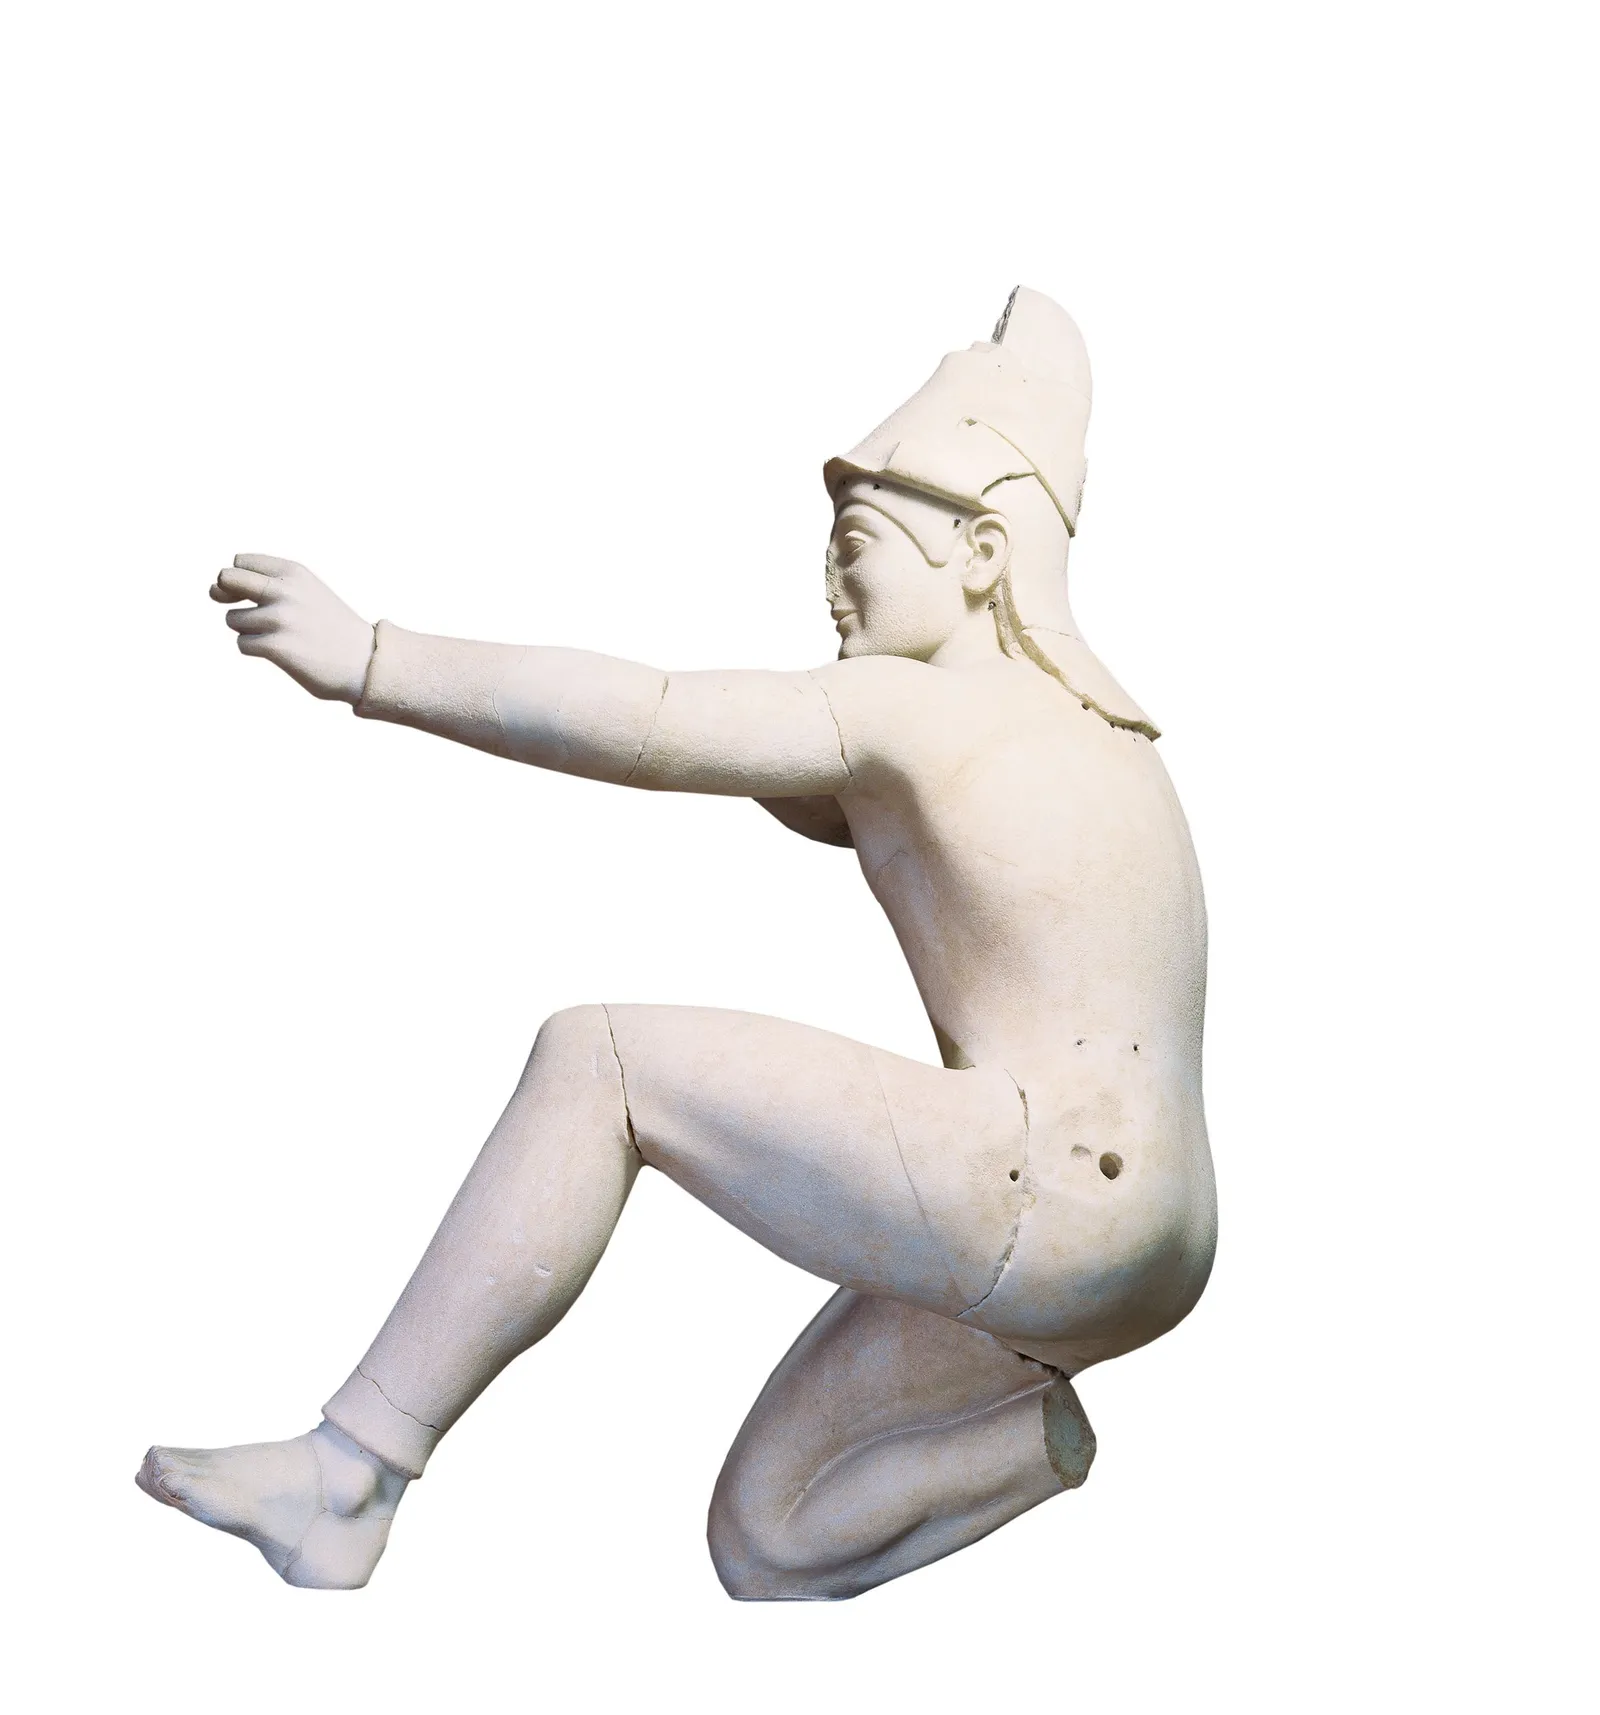 A white sculpture missing part of its face and leg, apparently with its fingers in a pose for archery.